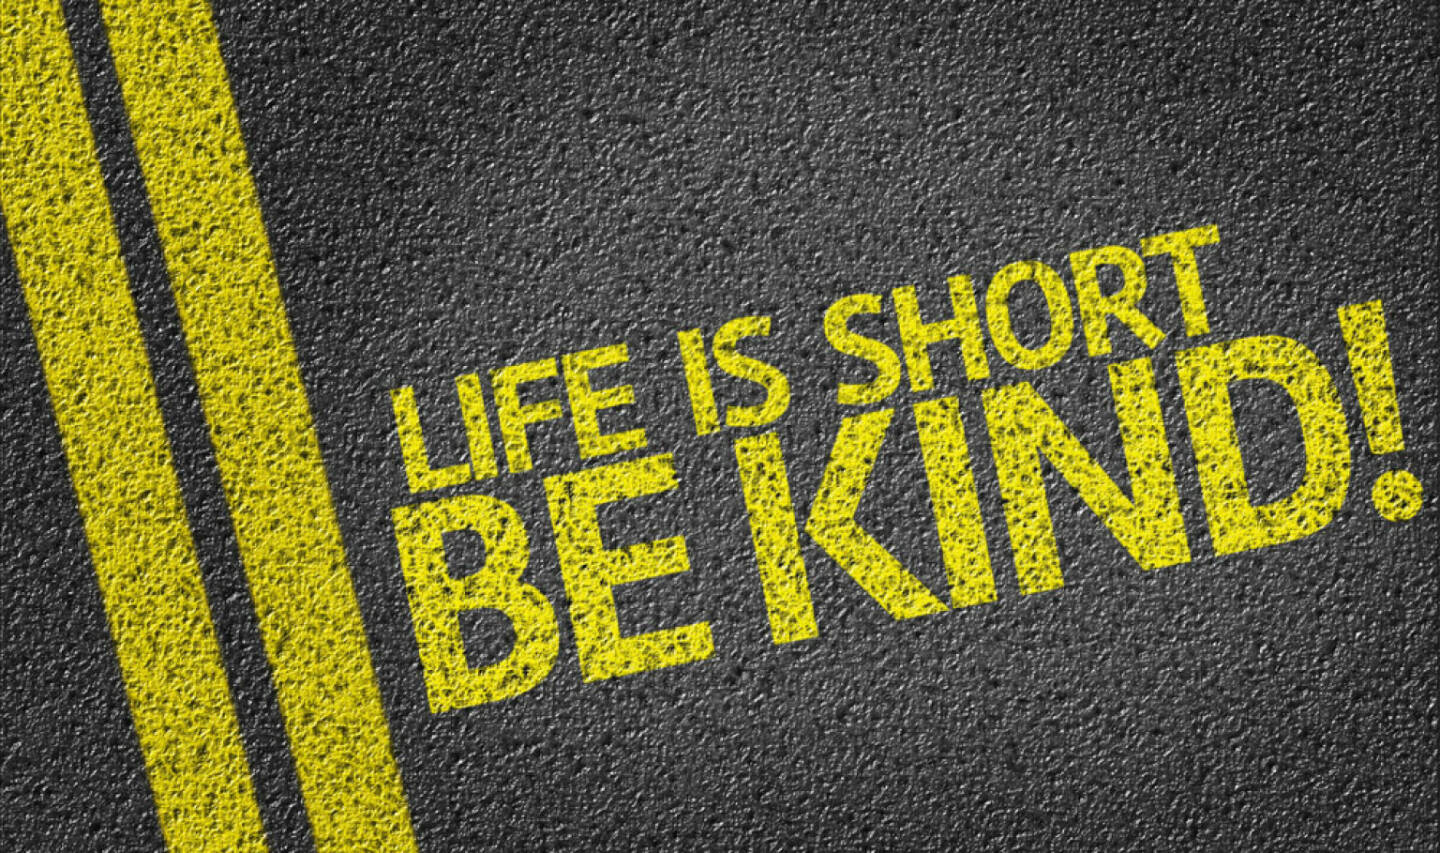 Life is short, be kind, http://www.shutterstock.com/de/pic-198056333/stock-photo-life-is-short-be-kind-written-on-the-road.html